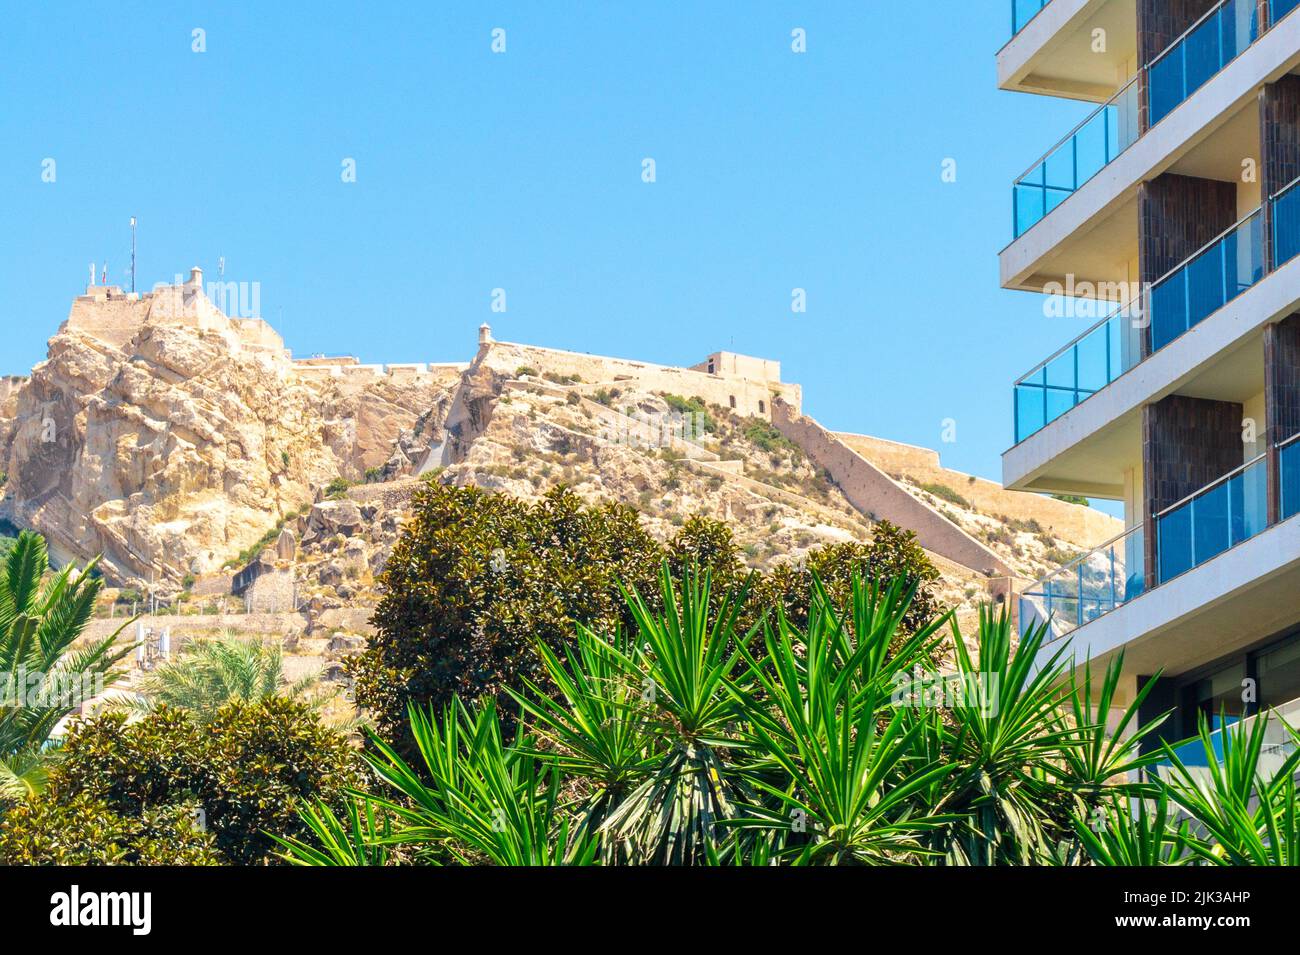 Alicante, Spain - July 10, 2022: Architecture contrast between the Santa Barbara Castle and a modern building Stock Photo